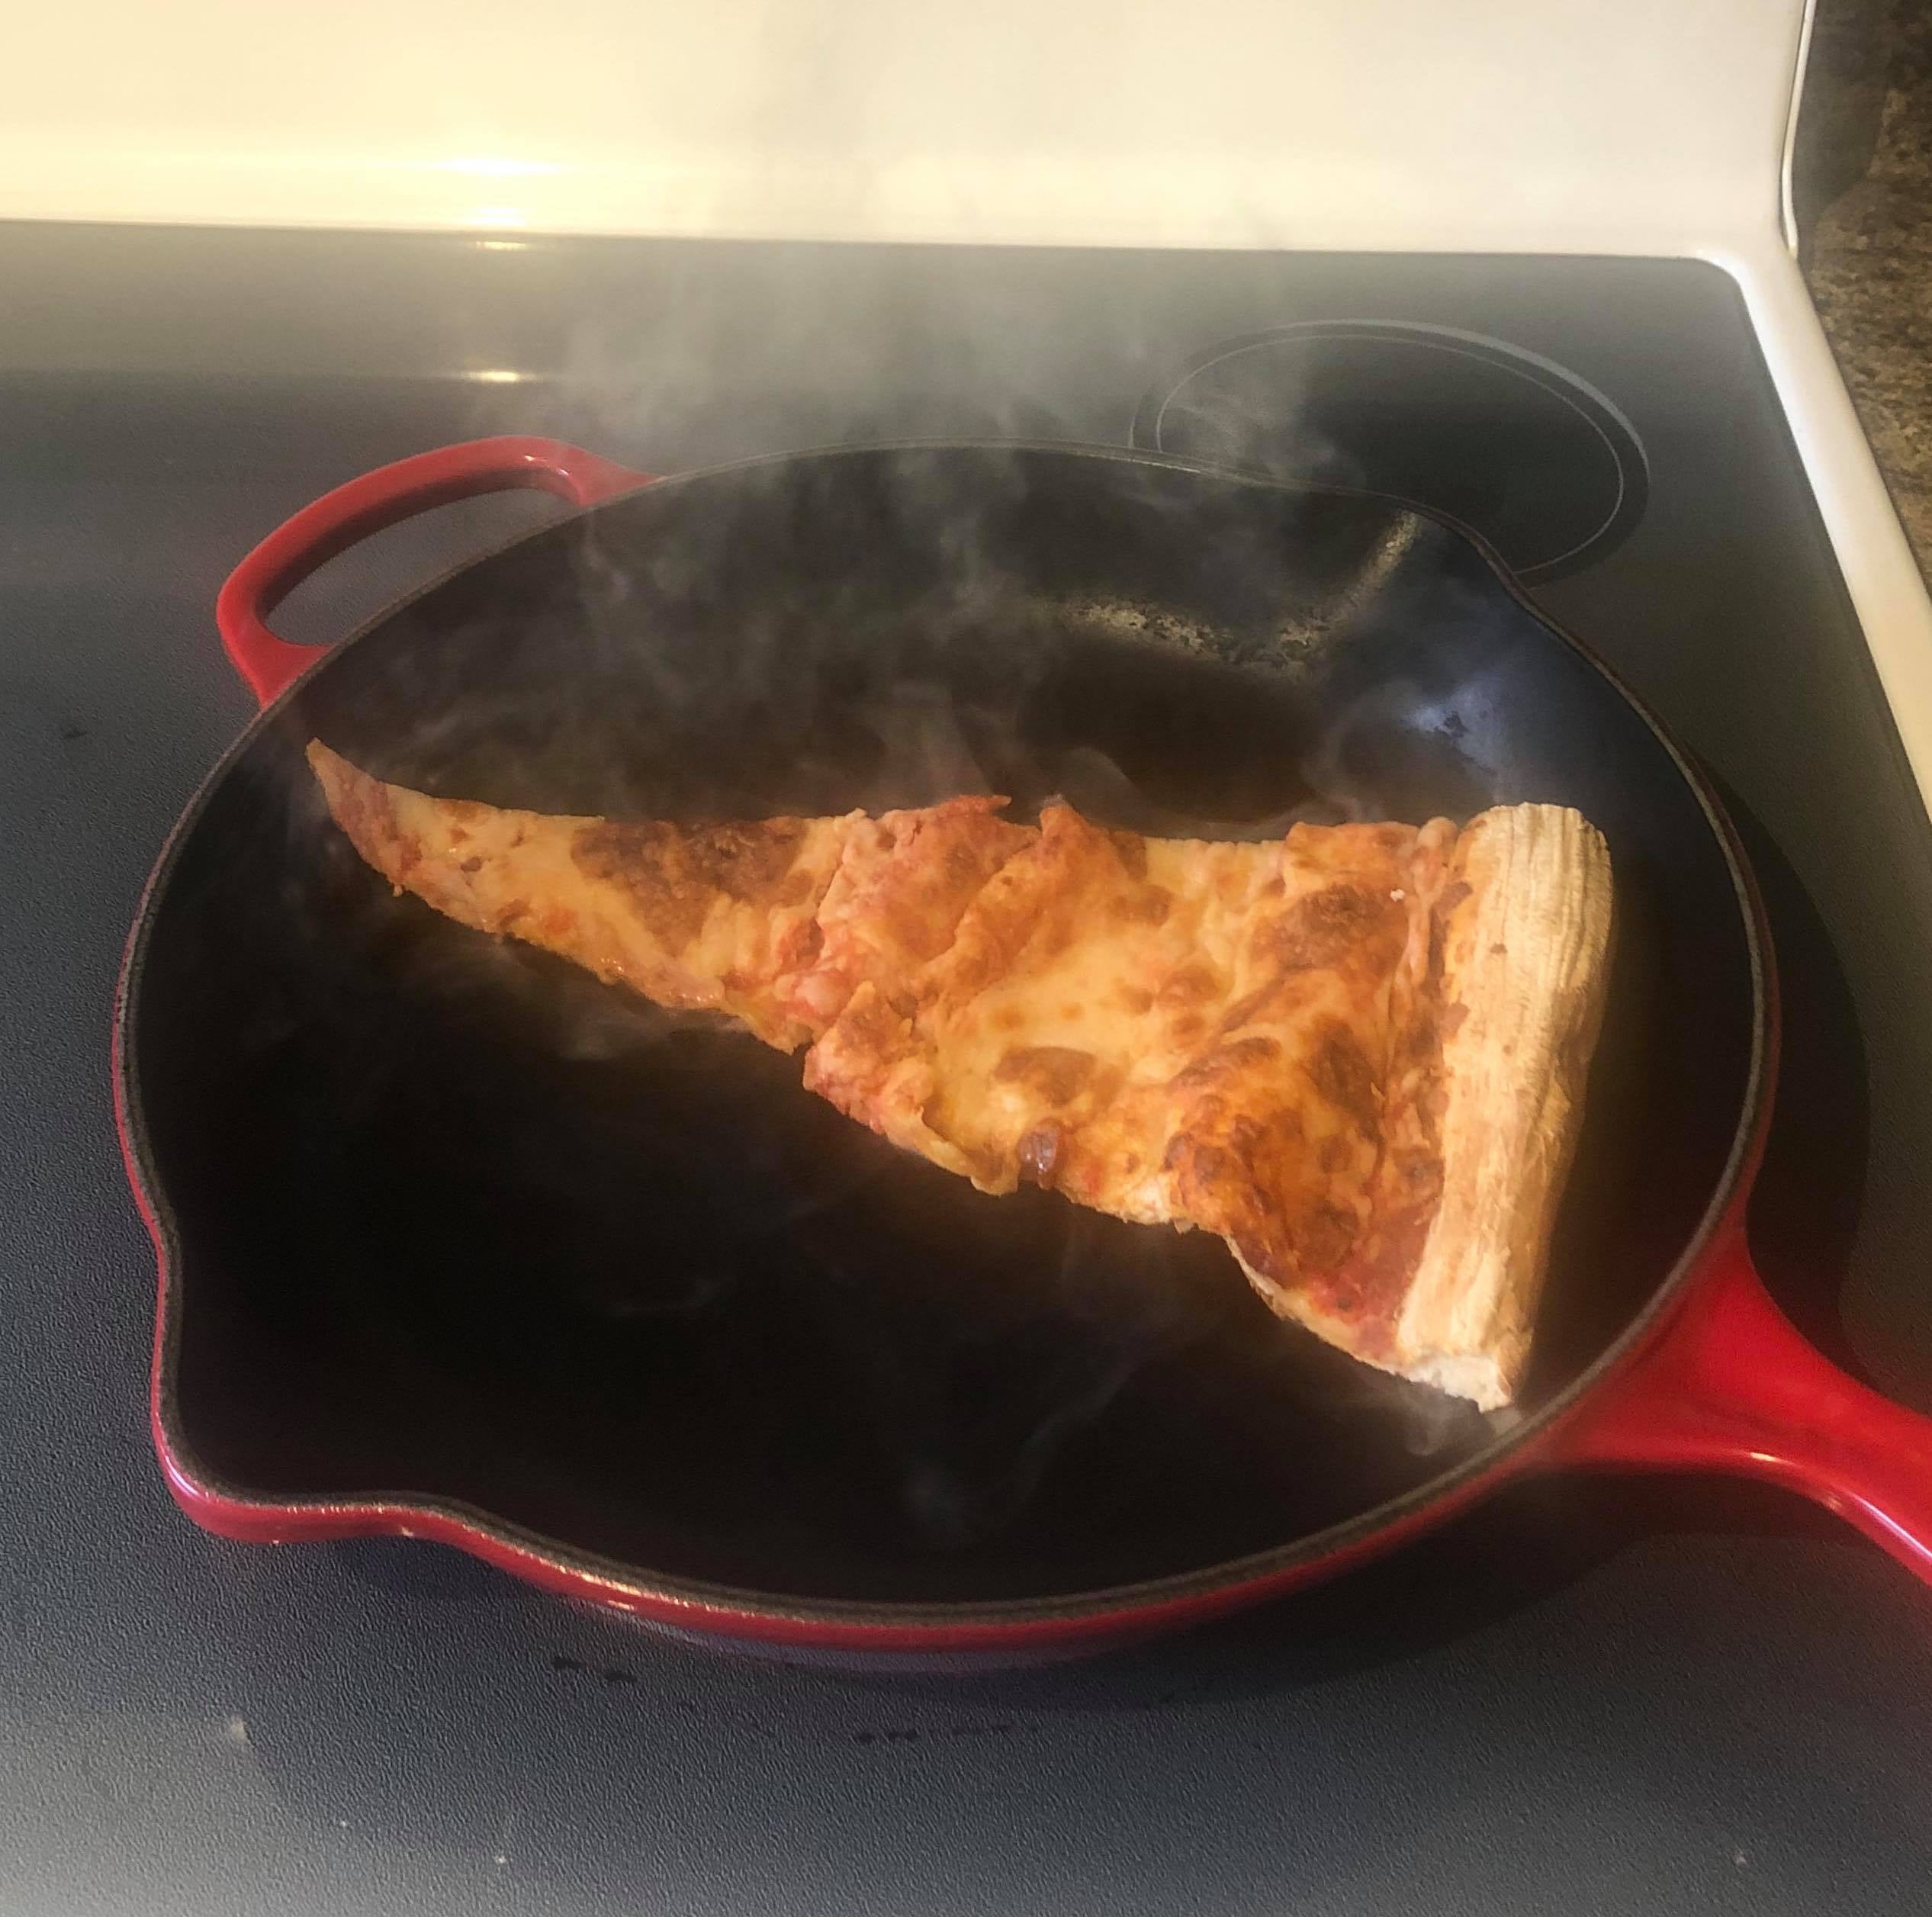 A slice of leftover cheese pizza burning on a cast-iron pan on an electric stove.